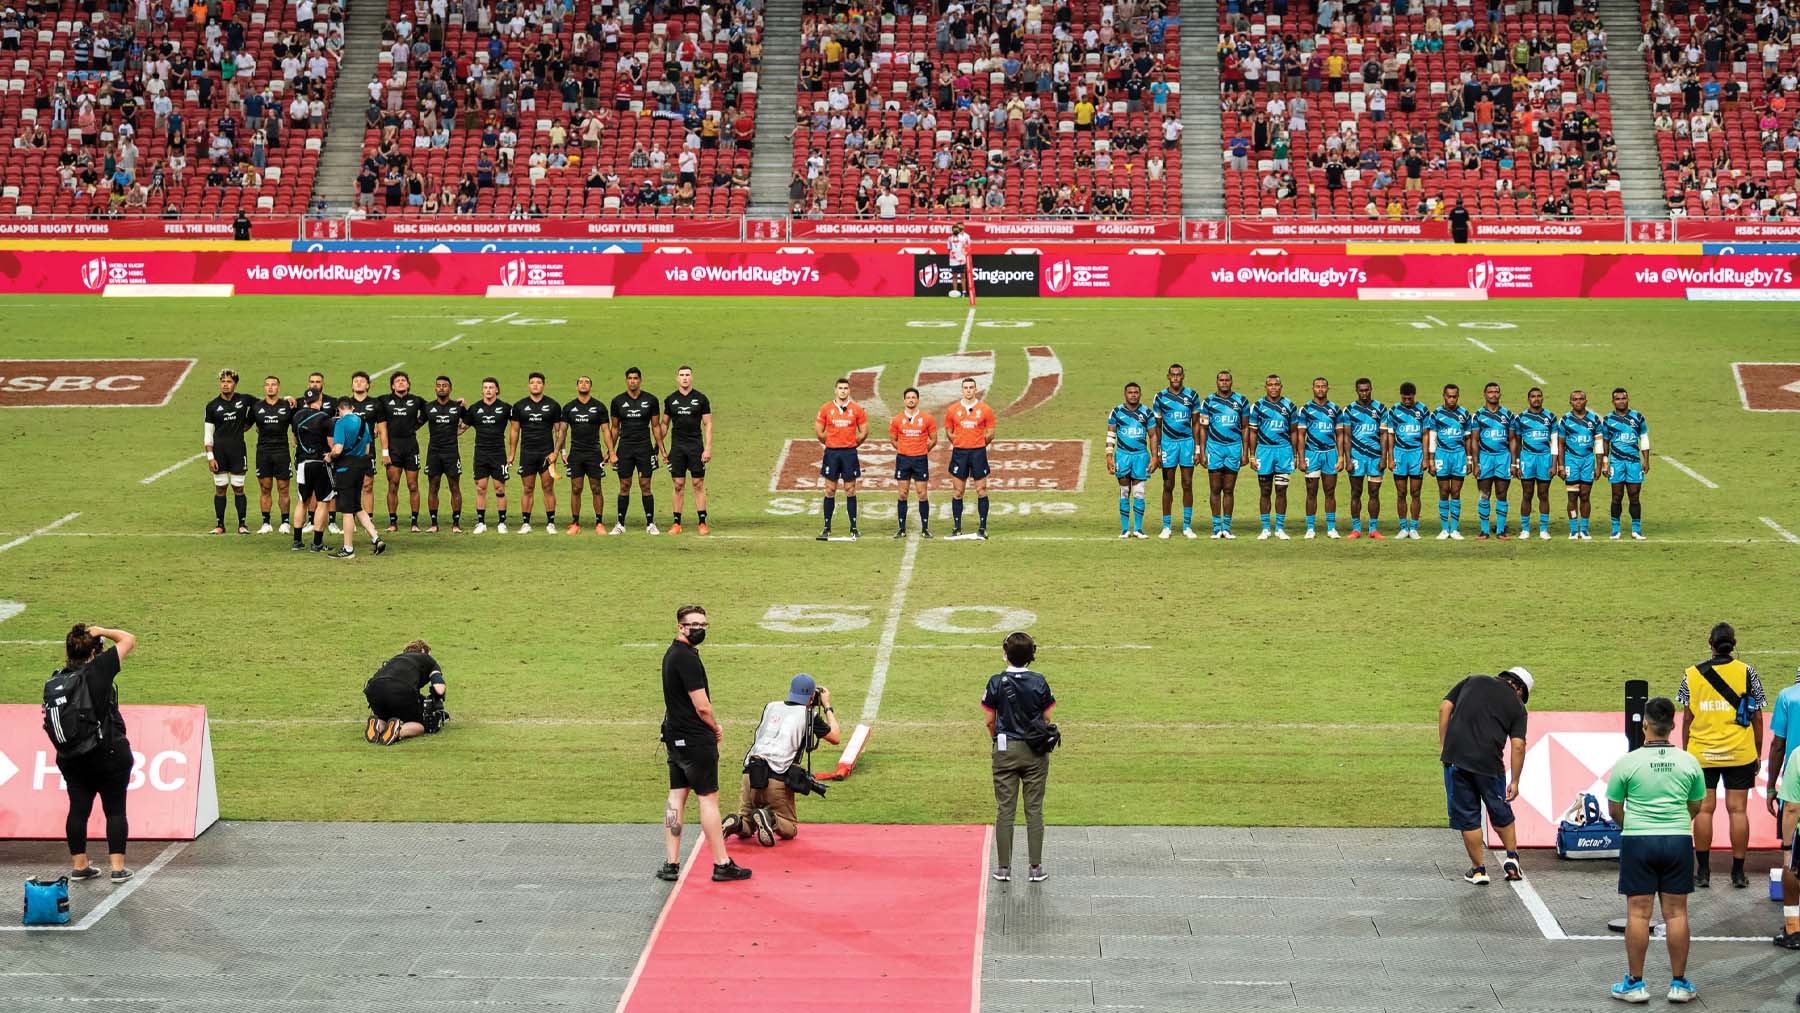 WORLD_RUGBY7s_Apr2022_3